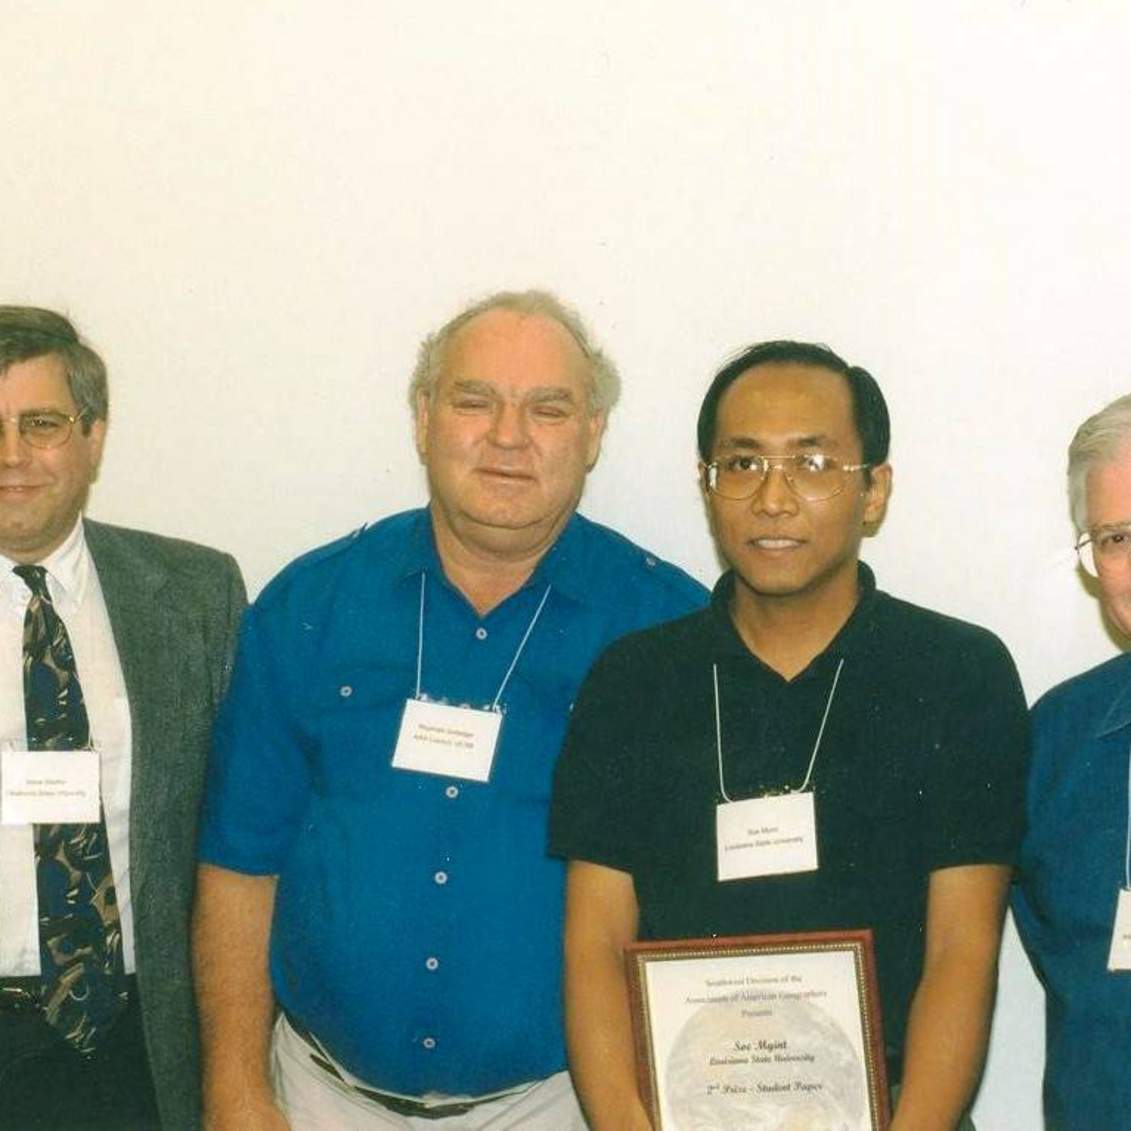 1999 AAG 2nd Place Student Paper